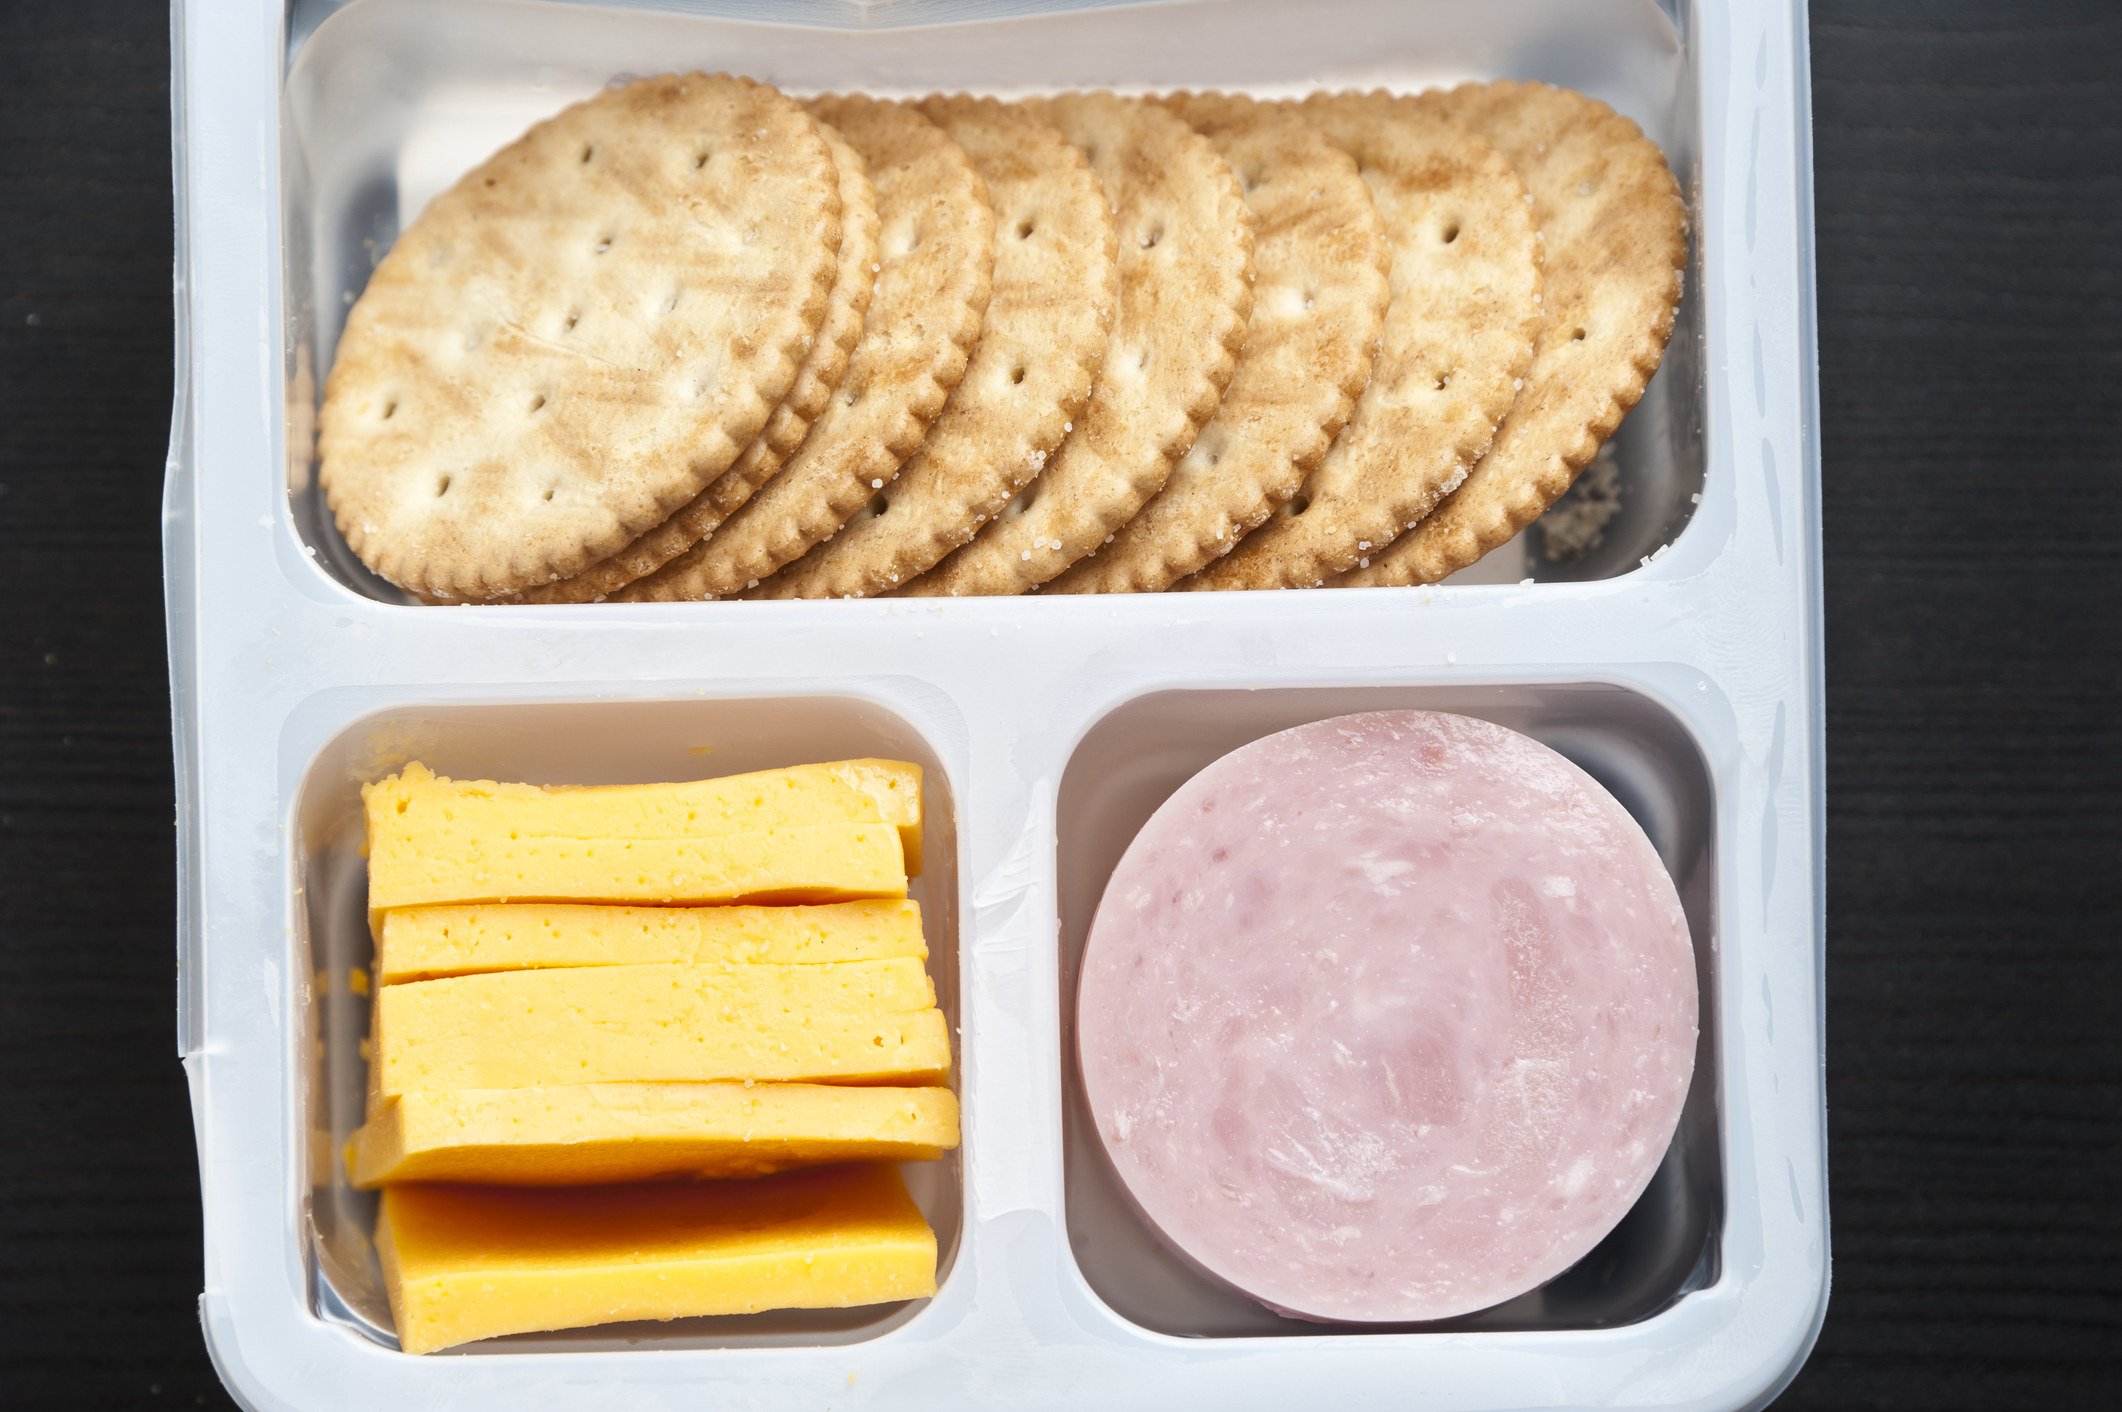 A Lunchable with cheese and Bologna.